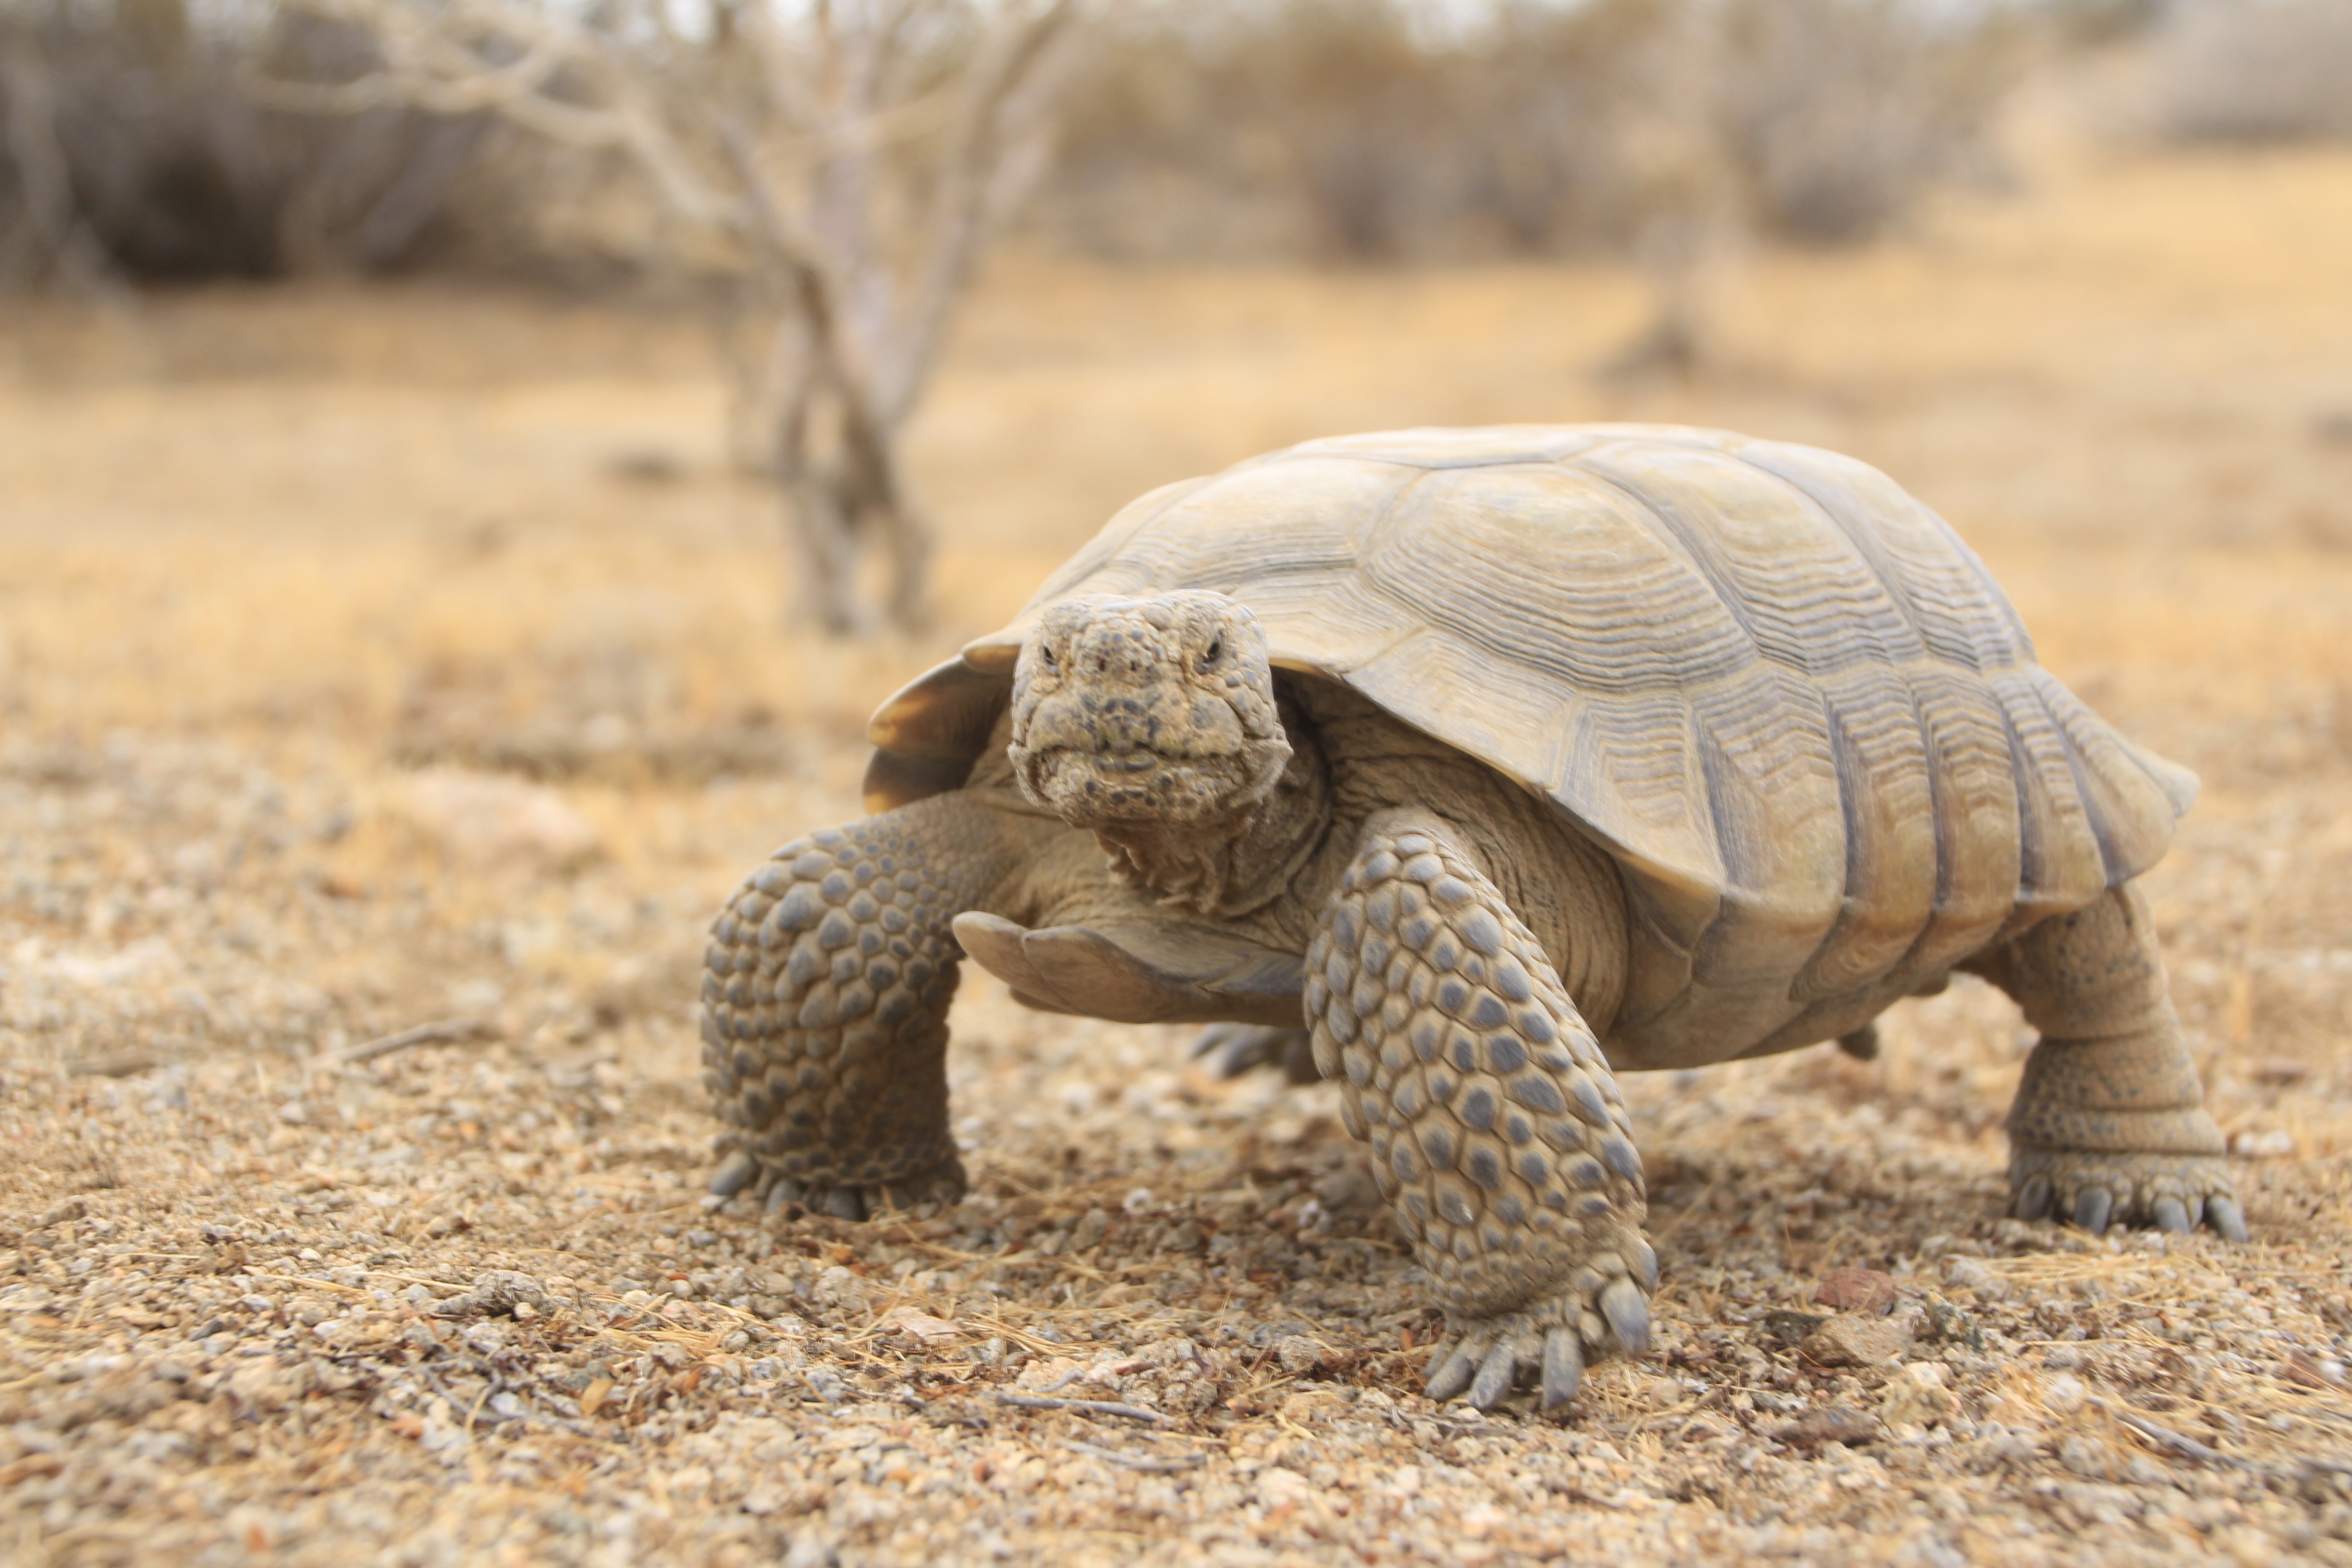 An adult desert tortoise stands in the rocky sand of the desert.